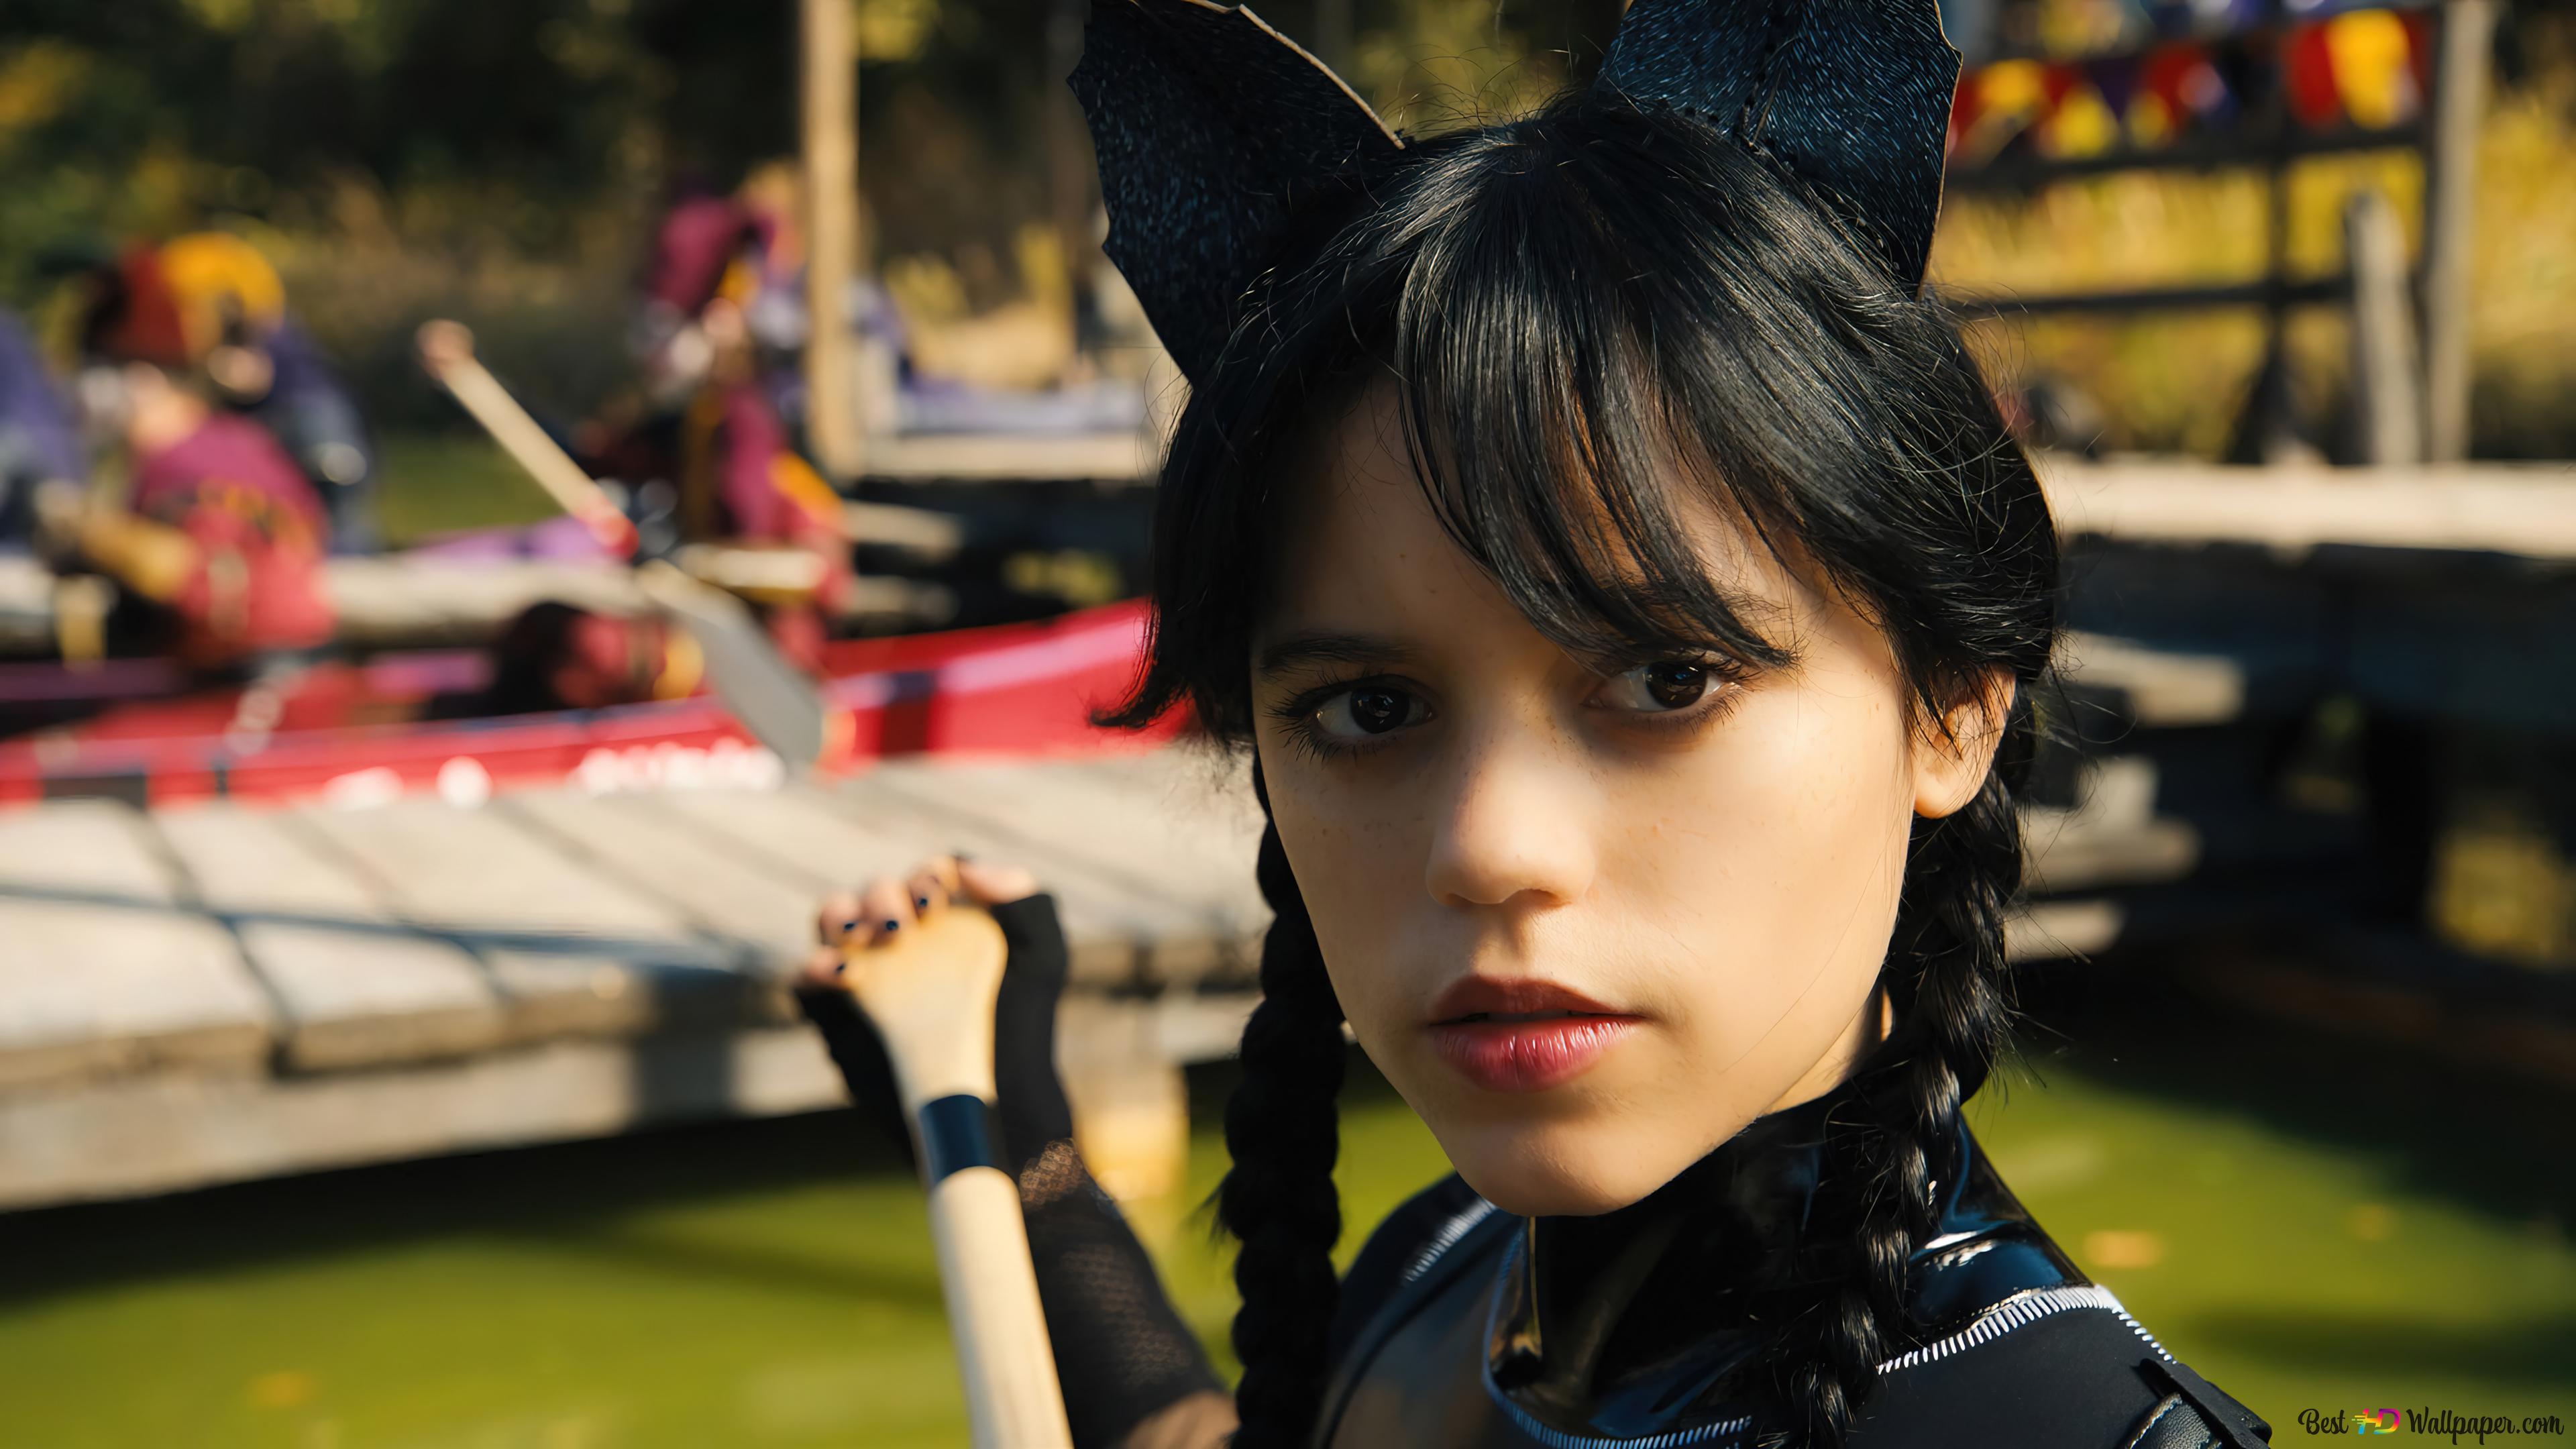 Wednesday Addams Cat costume from Wednesday 4K wallpaper download